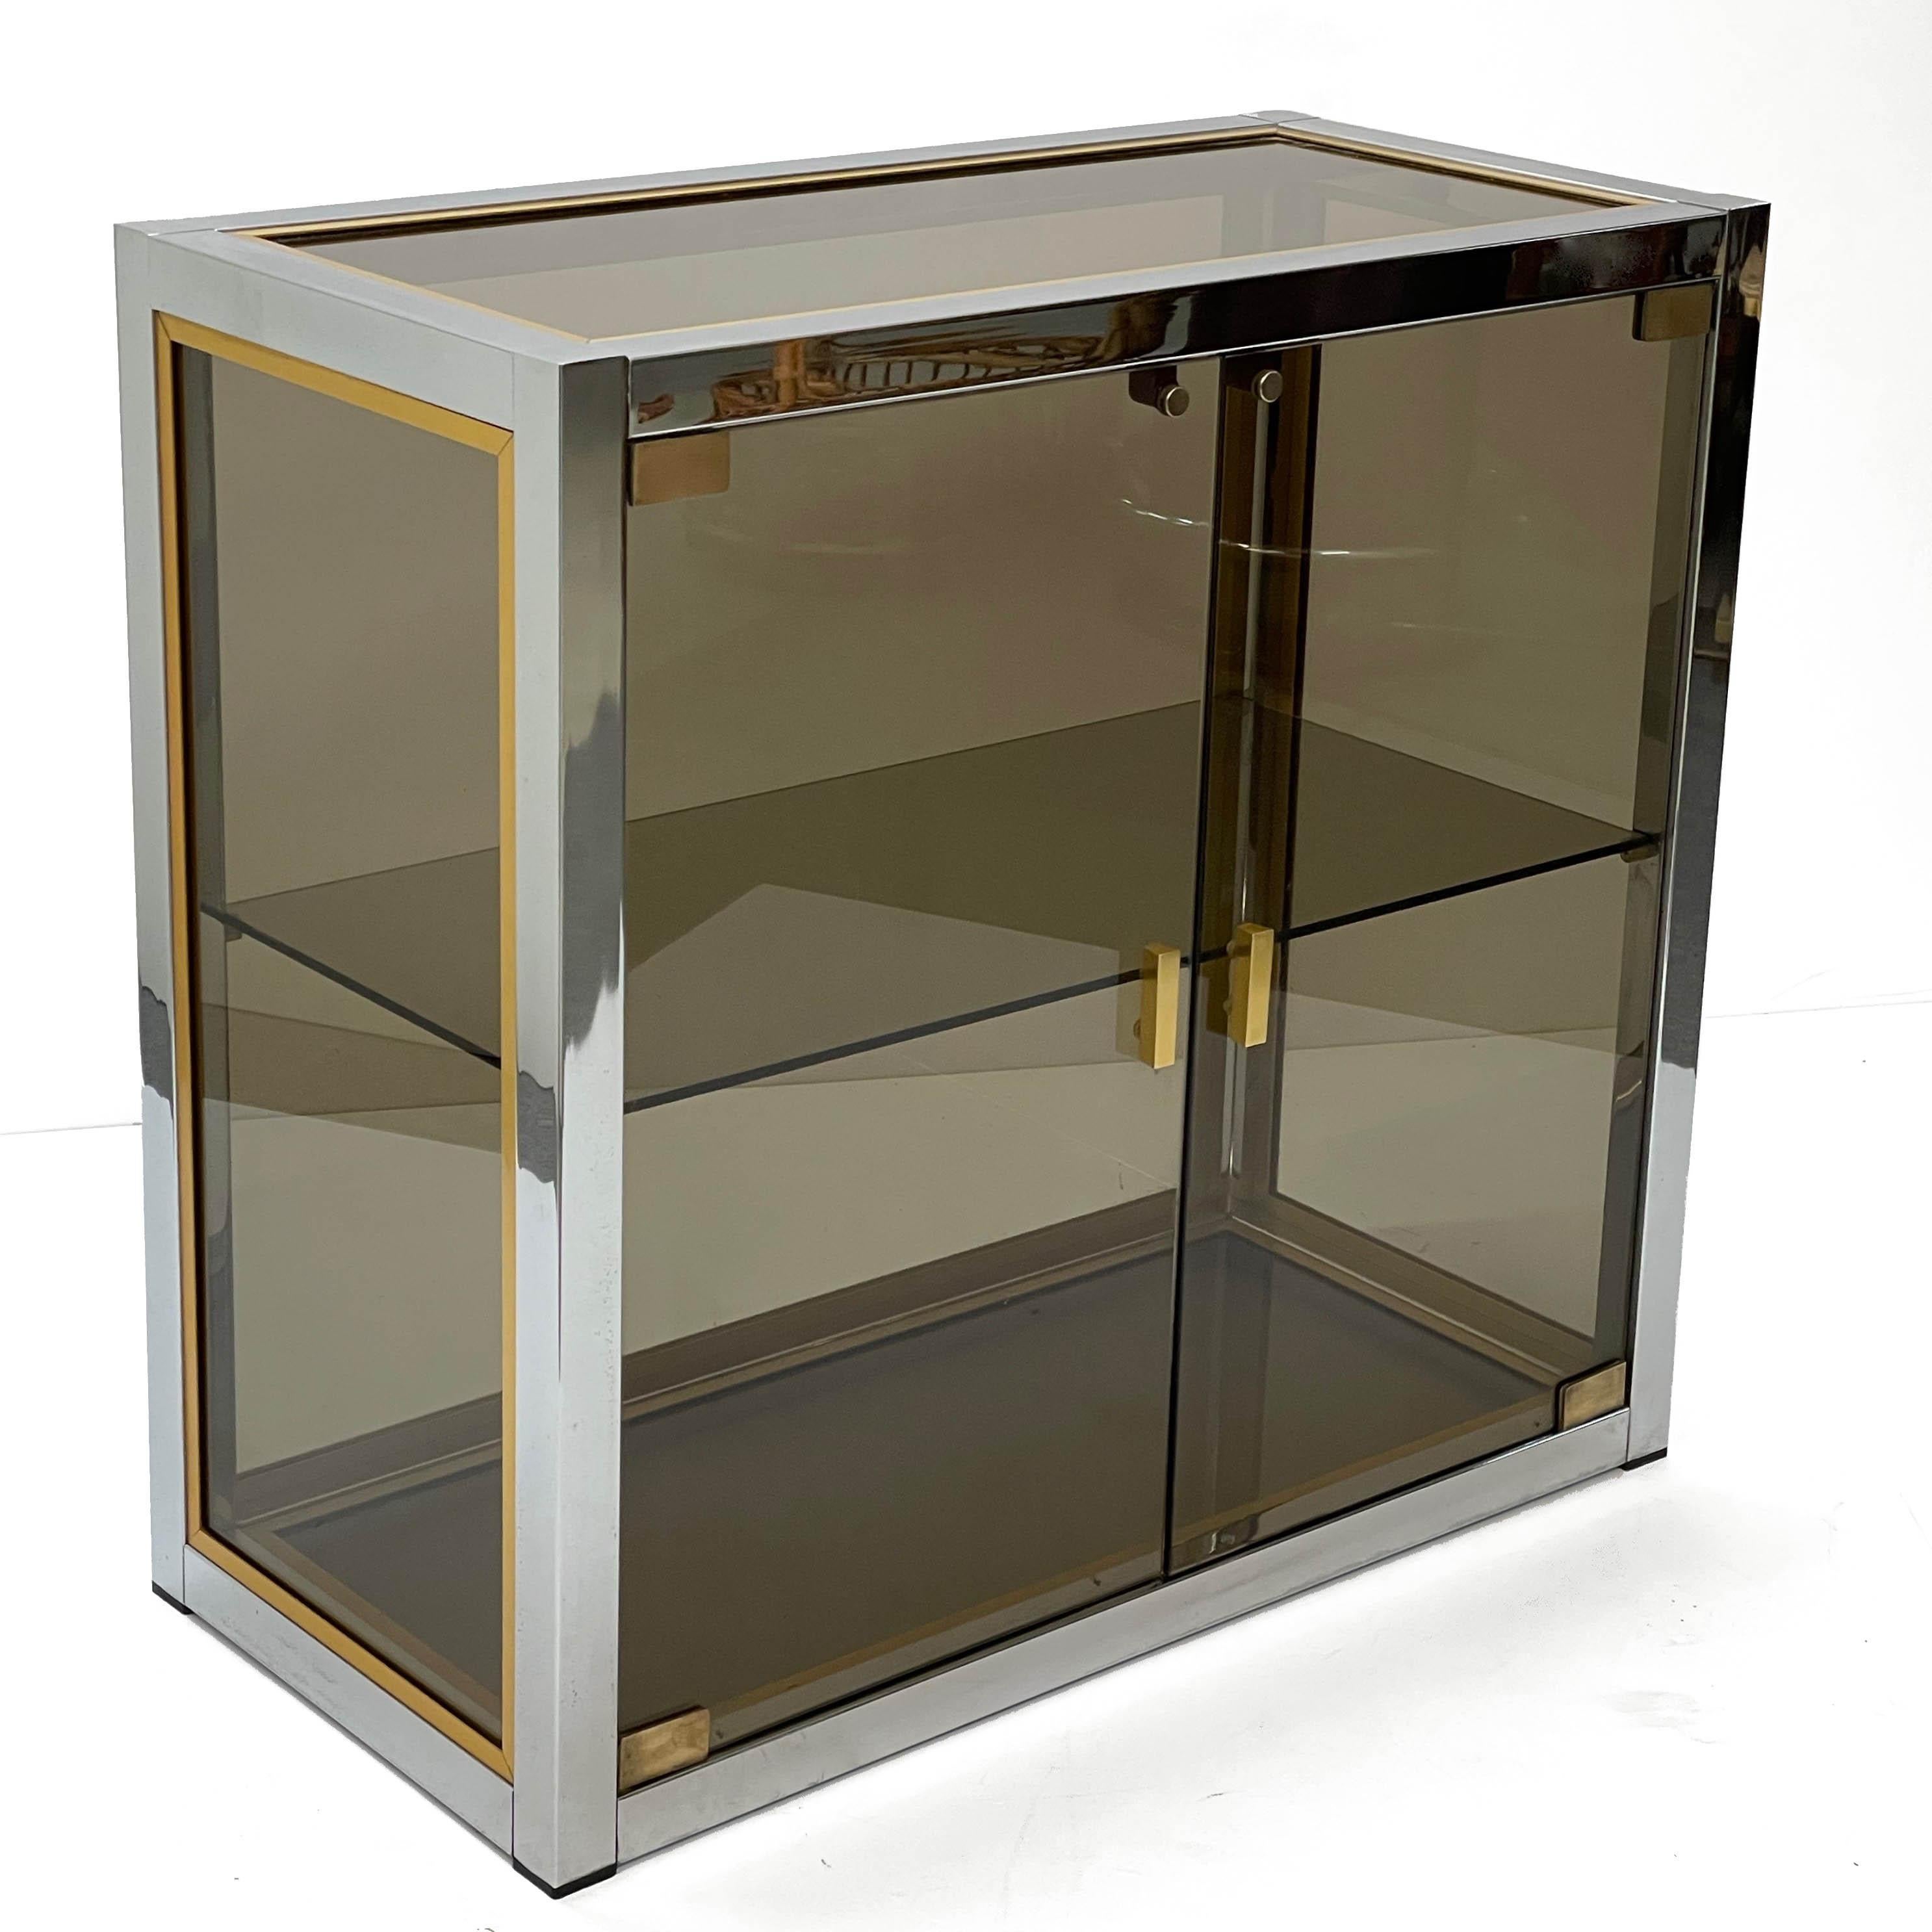 Amazing midcentury smoked glass doors with chrome finishes and smoked glass shelves. This fantastic piece was designed by Renato Zevi in Italy during the 1970s.

This item is extremely charming because of the material mix, smoked glass for doors